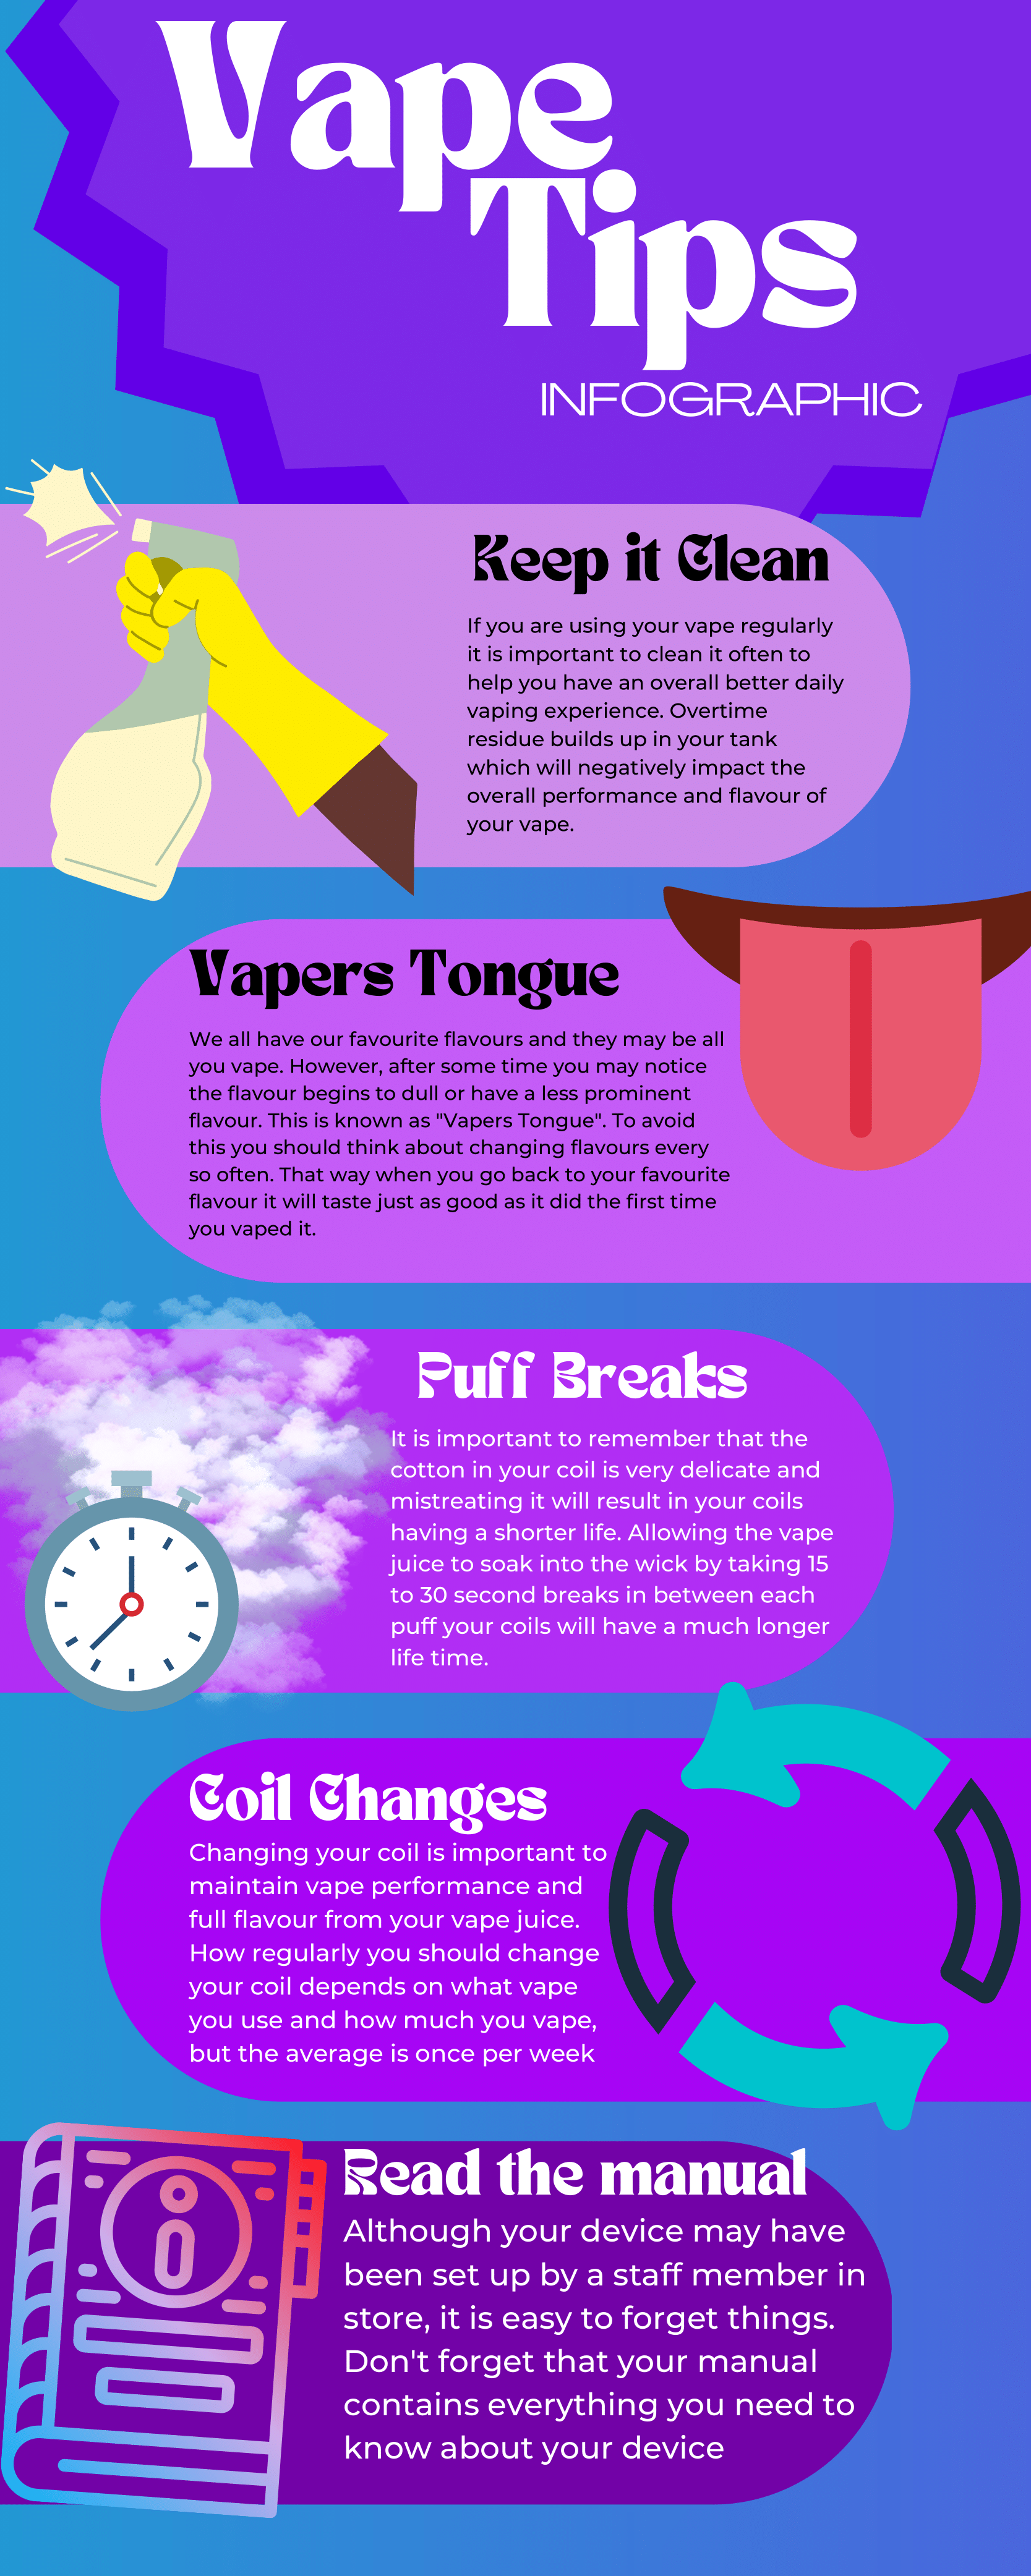 Vape Tips Infographic. Keep it clean. If you are using your vape regularly it is important to clean it often to help you have an overall better daily vaping experience. Overtime residue builds up in your tank which will negatively impact the overall performance and flavour of your vape. Vapers Tongue. We all have our favourite flavours and the may be all you vape. However, after some time you may notice the flavour begins to dull or have a less prominent flavour. This is known as "Vapers Tongue". To avoid this you should think about changing flavours every so often. That way when you go back to your favourite flavour it will taste just as good as it did the first time you vaped it. Puff Breaks. It is important to remember that cotton in your coil is very delicate and mistreating it will result in your coils having a shorter life. Allowing the vape juice to soak into the wick by taking 15 to 30 second breaks in between each puff your coils will have a much longer life time. Coil changes. Changing your coil is important to maintain vape performance and full flavour from your vape juice. How regularly you should change your coil depends on what vape you use and how much you vape, but the average is once per week. Read the manual. Although your device may have been set up by a staff member in store, it is easy to forget things. Don't forget that your manual contains everything you need to know about your device.